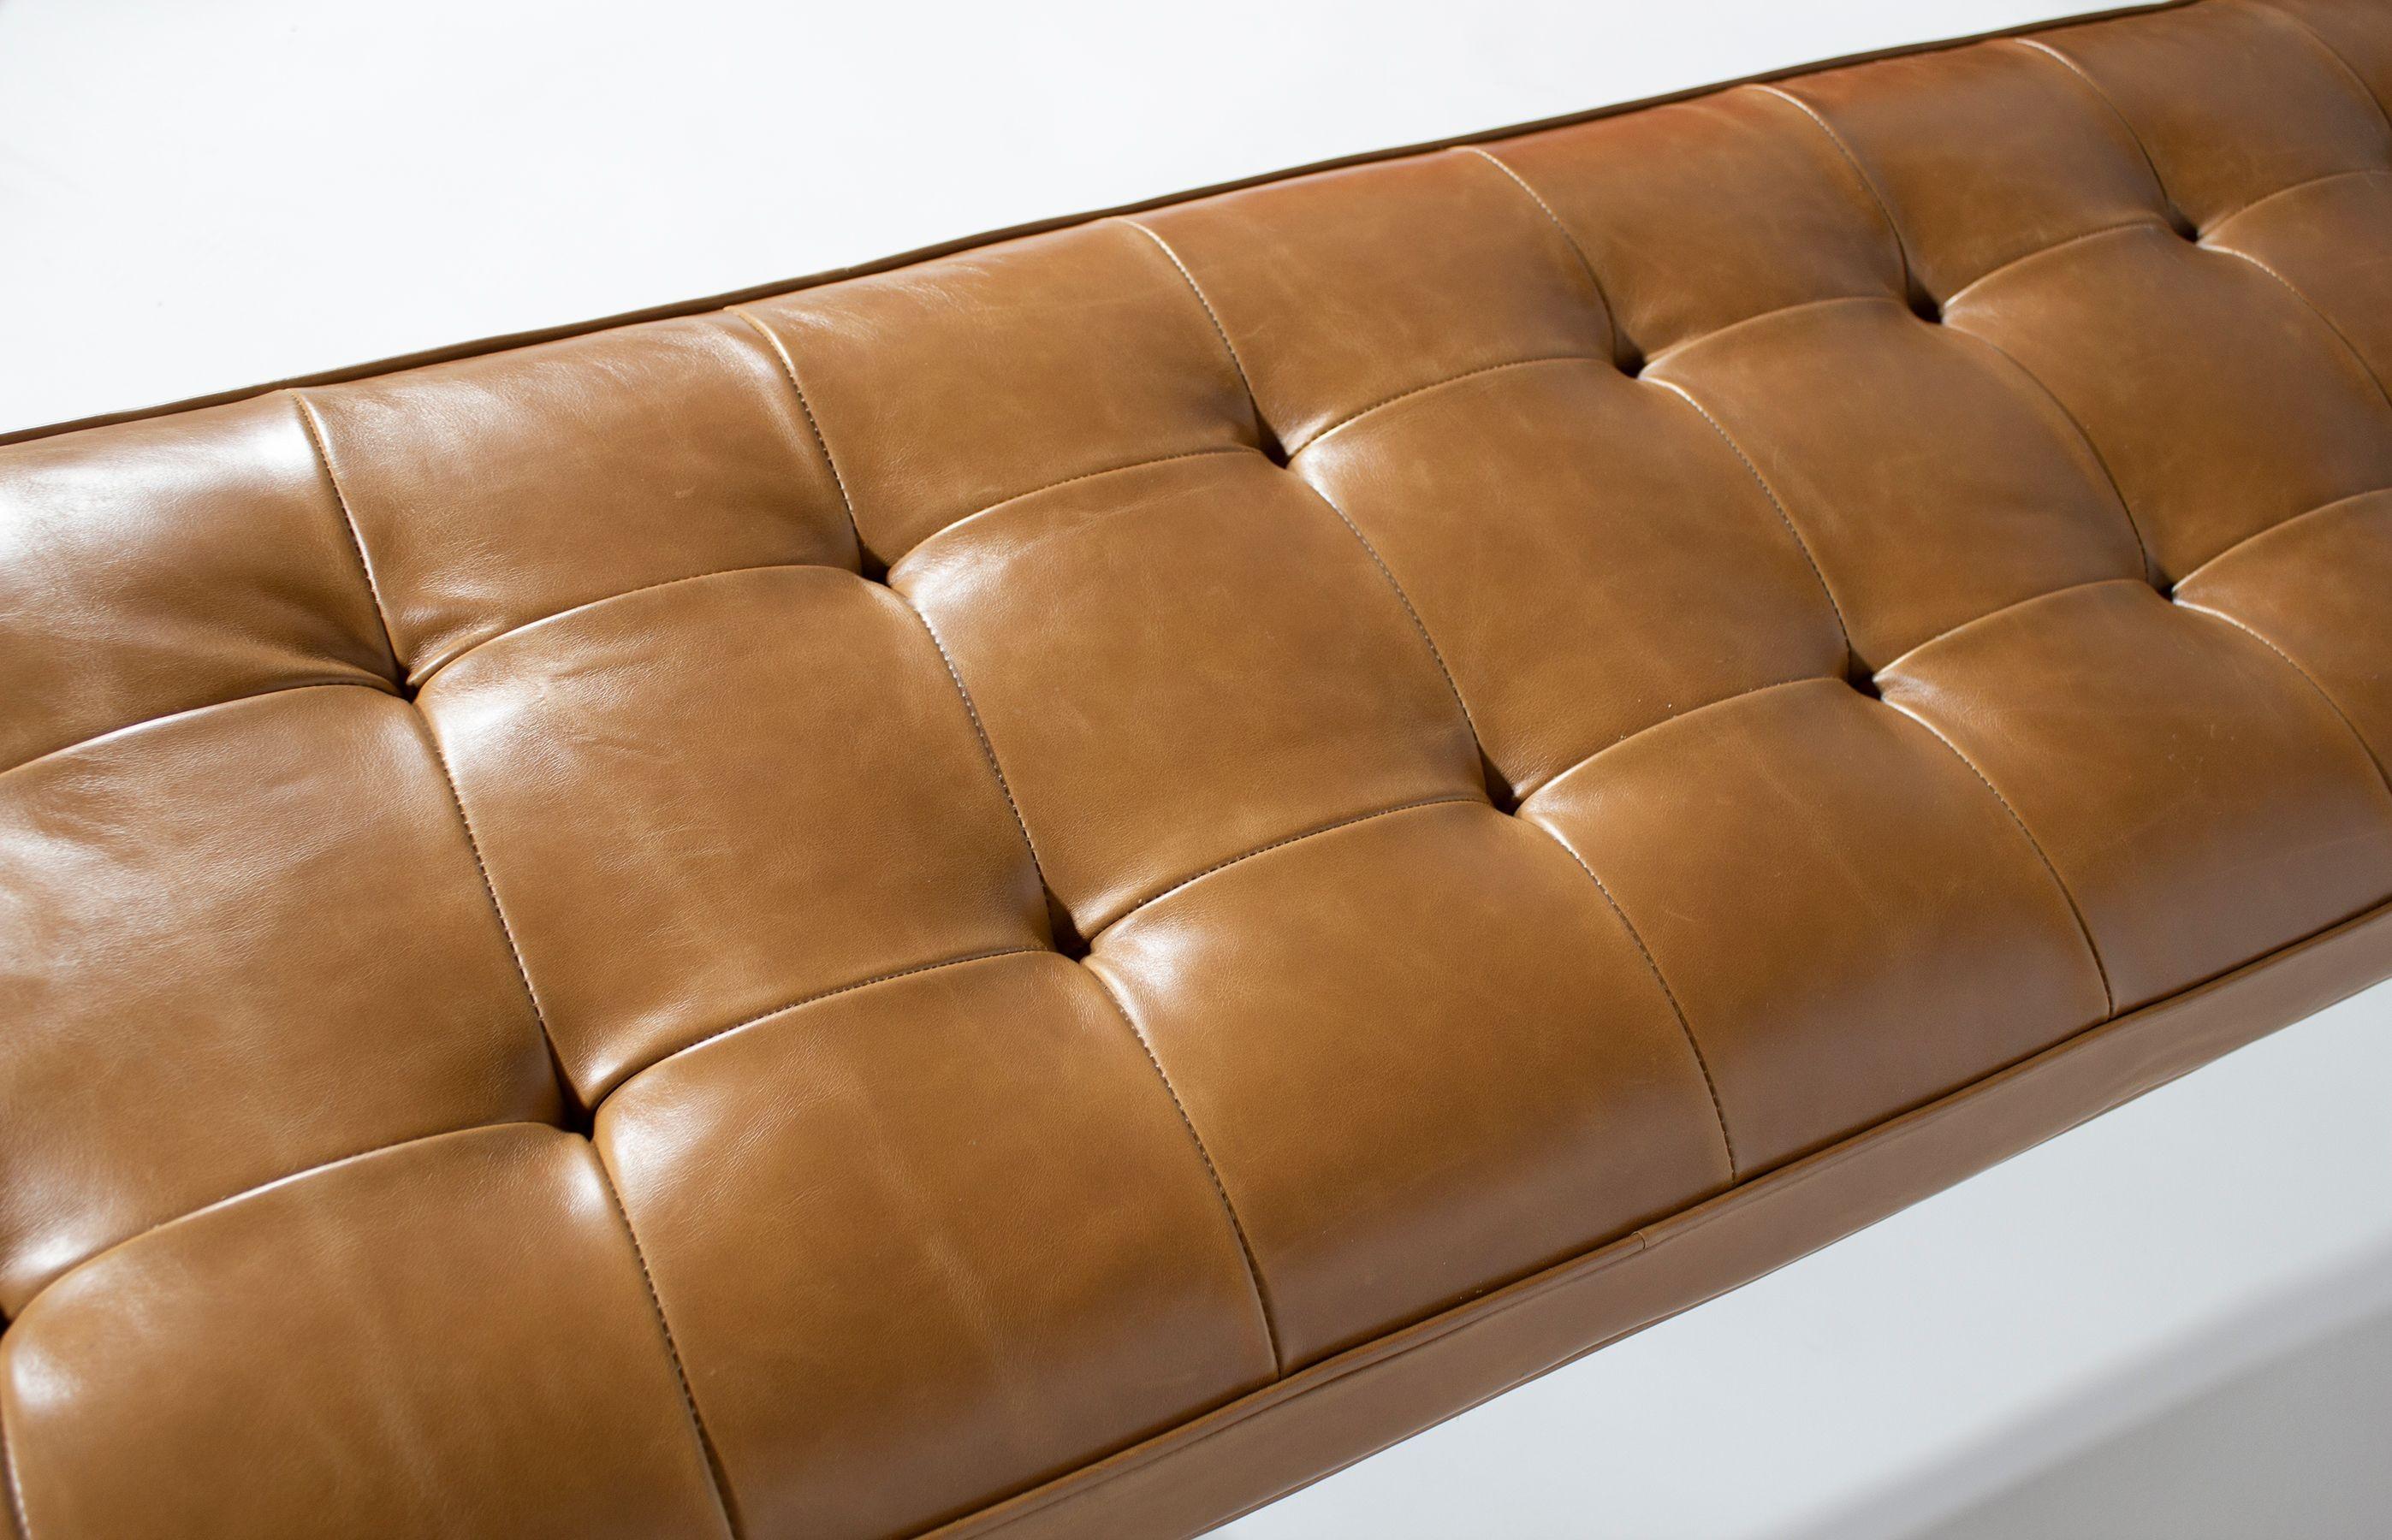 Steel Laverne International Long Bench in Box-Tufted Camel Leather NYC Series 1960s